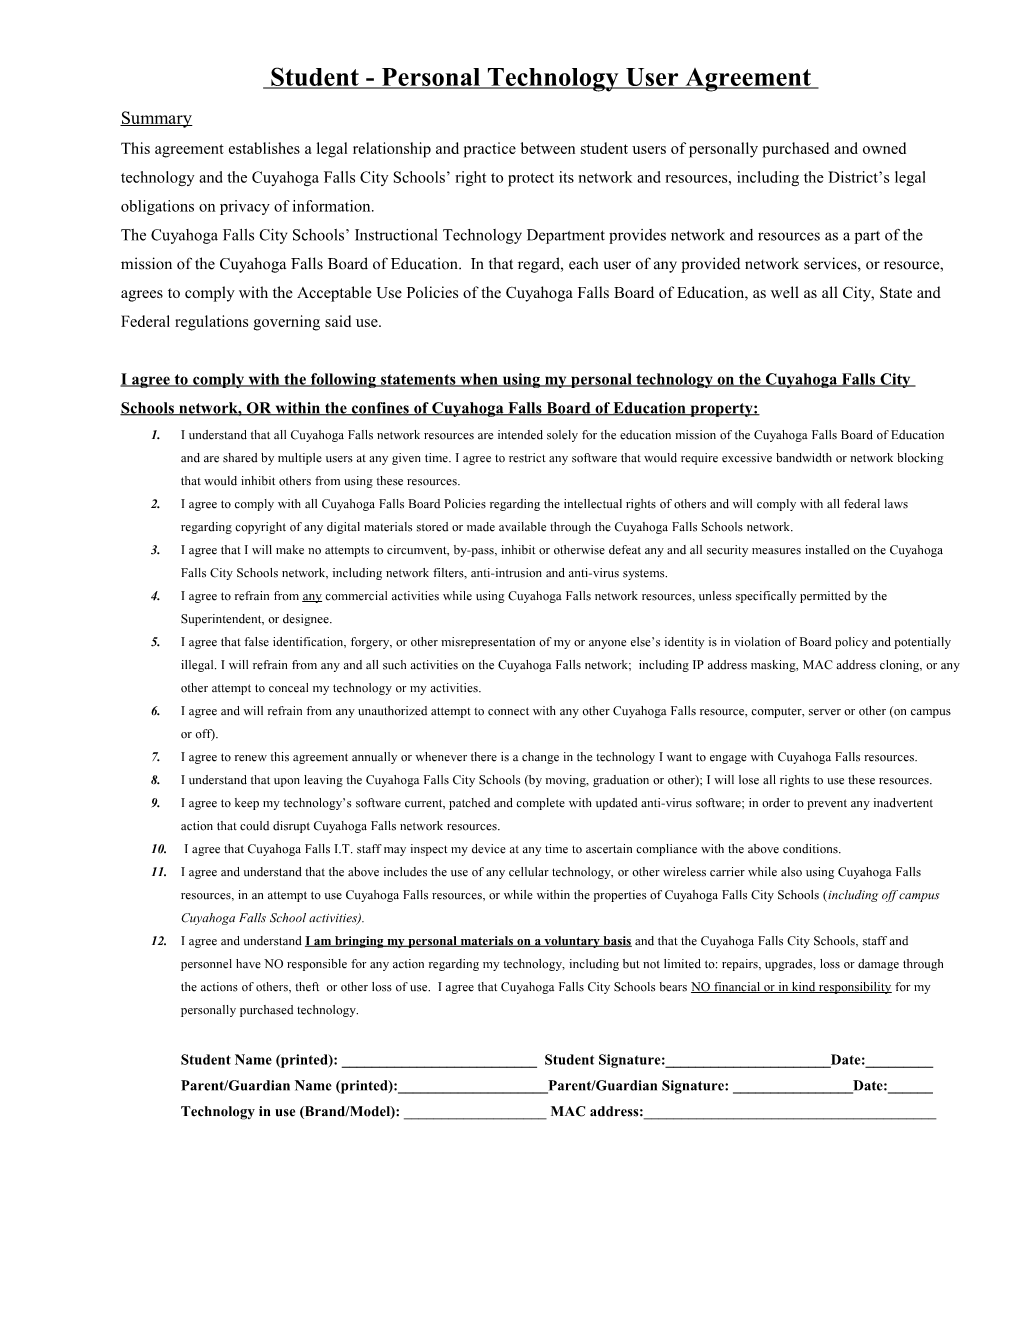 Student -Personal Technology User Agreement